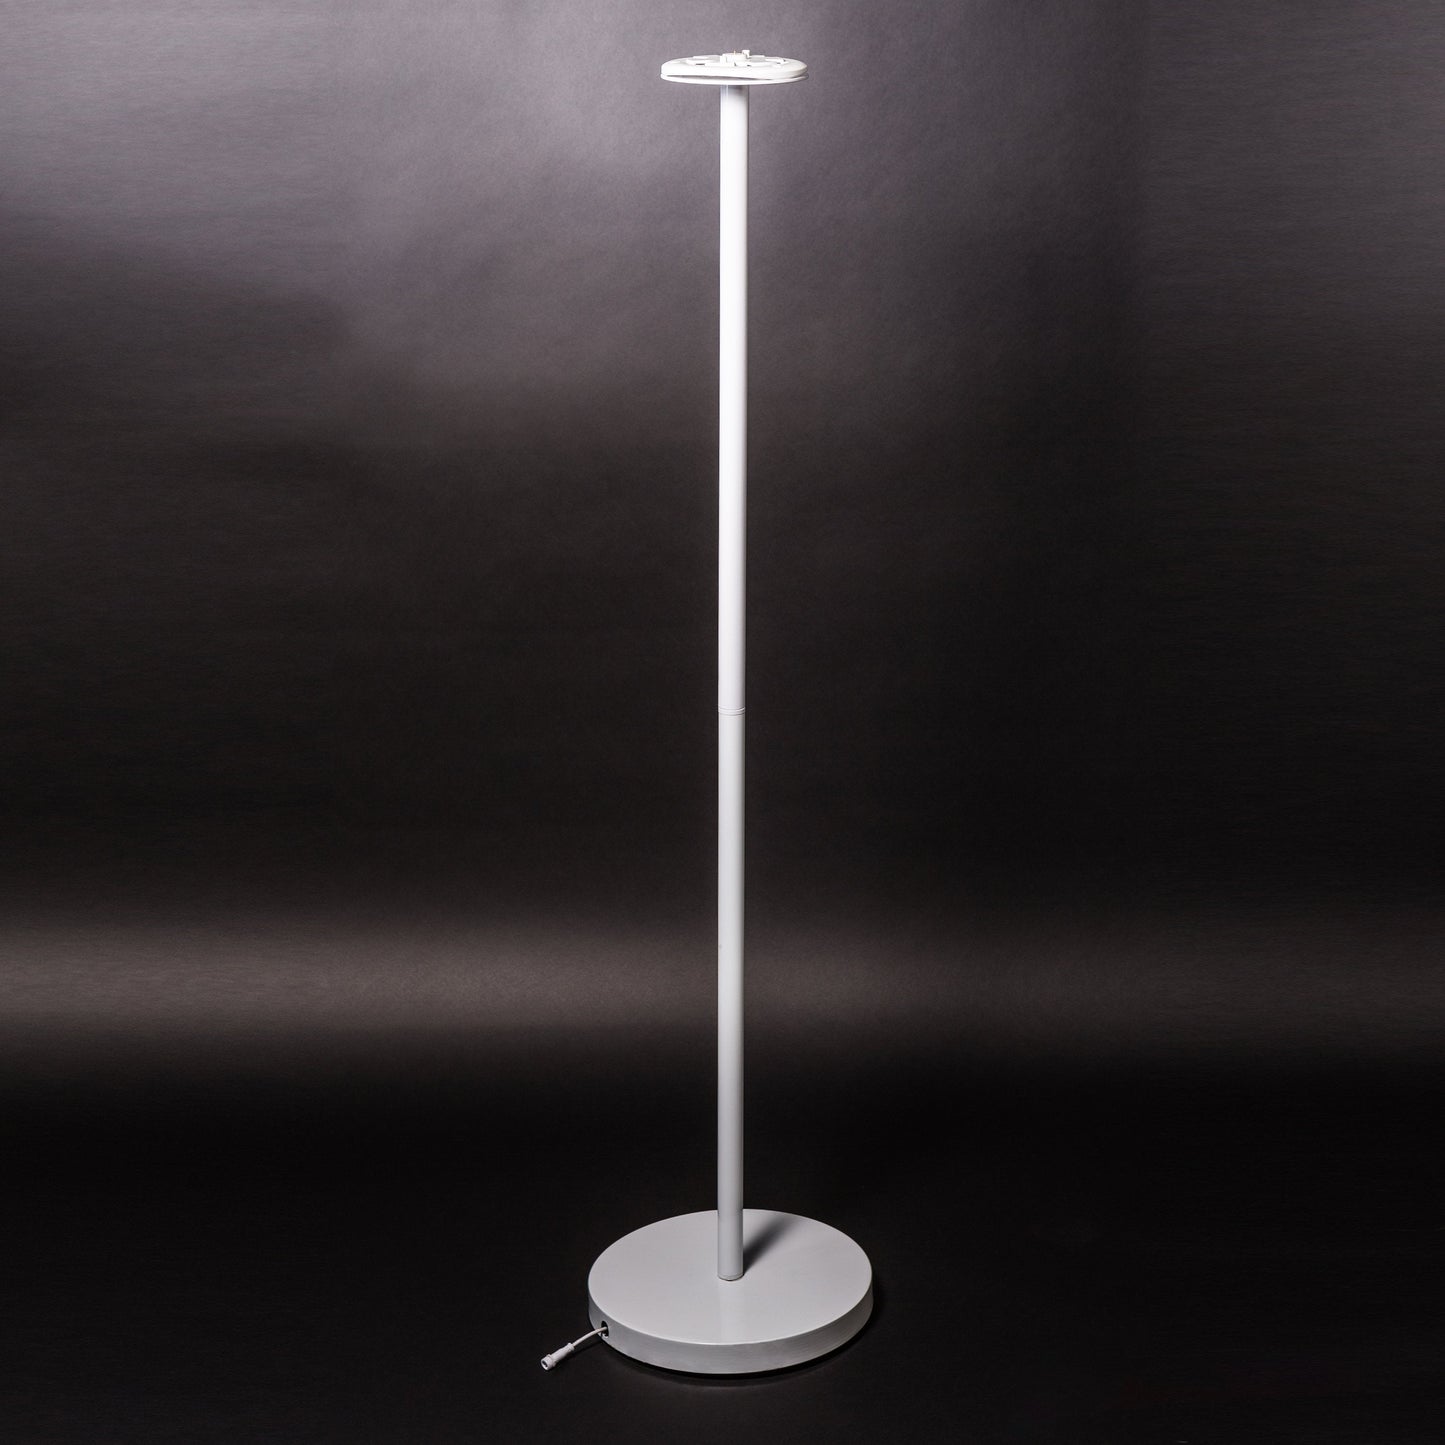 Vessel 2 Outdoor Bluetooth LED Table Lamp